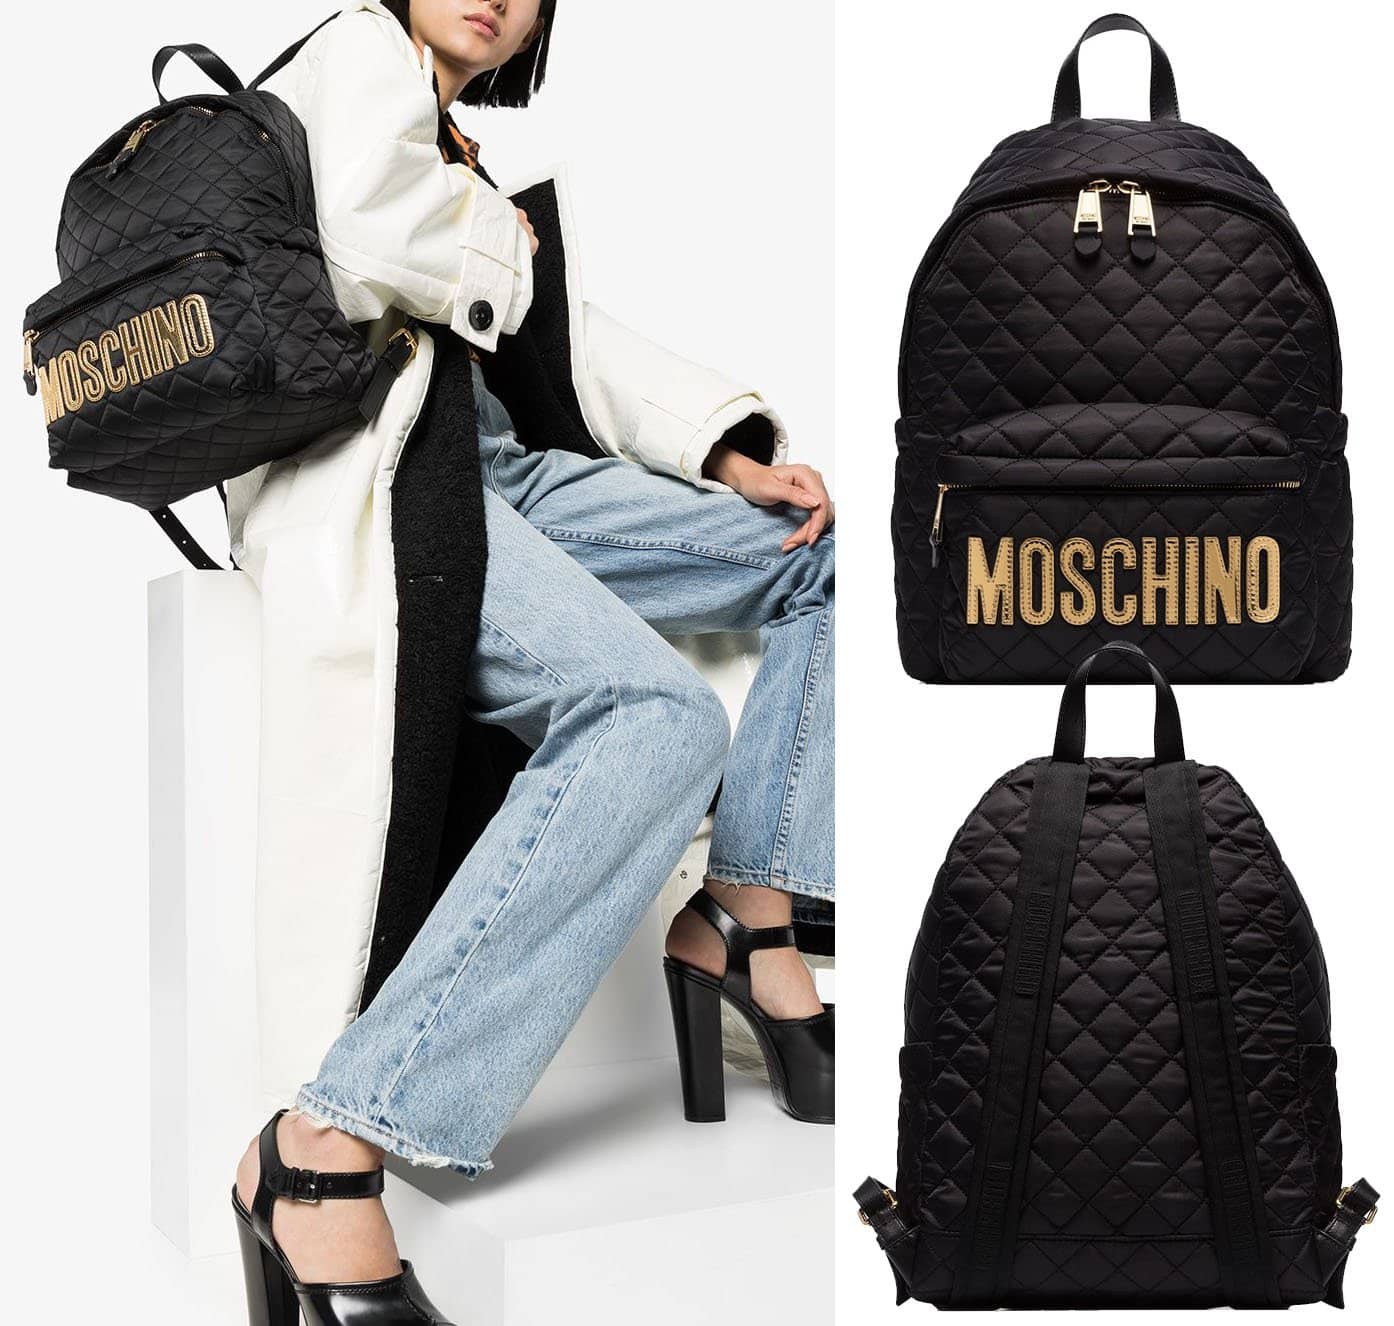 A lightweight and minimalist diamond quilted backpack finished with Moschino's gold-tone logo lettering across the front